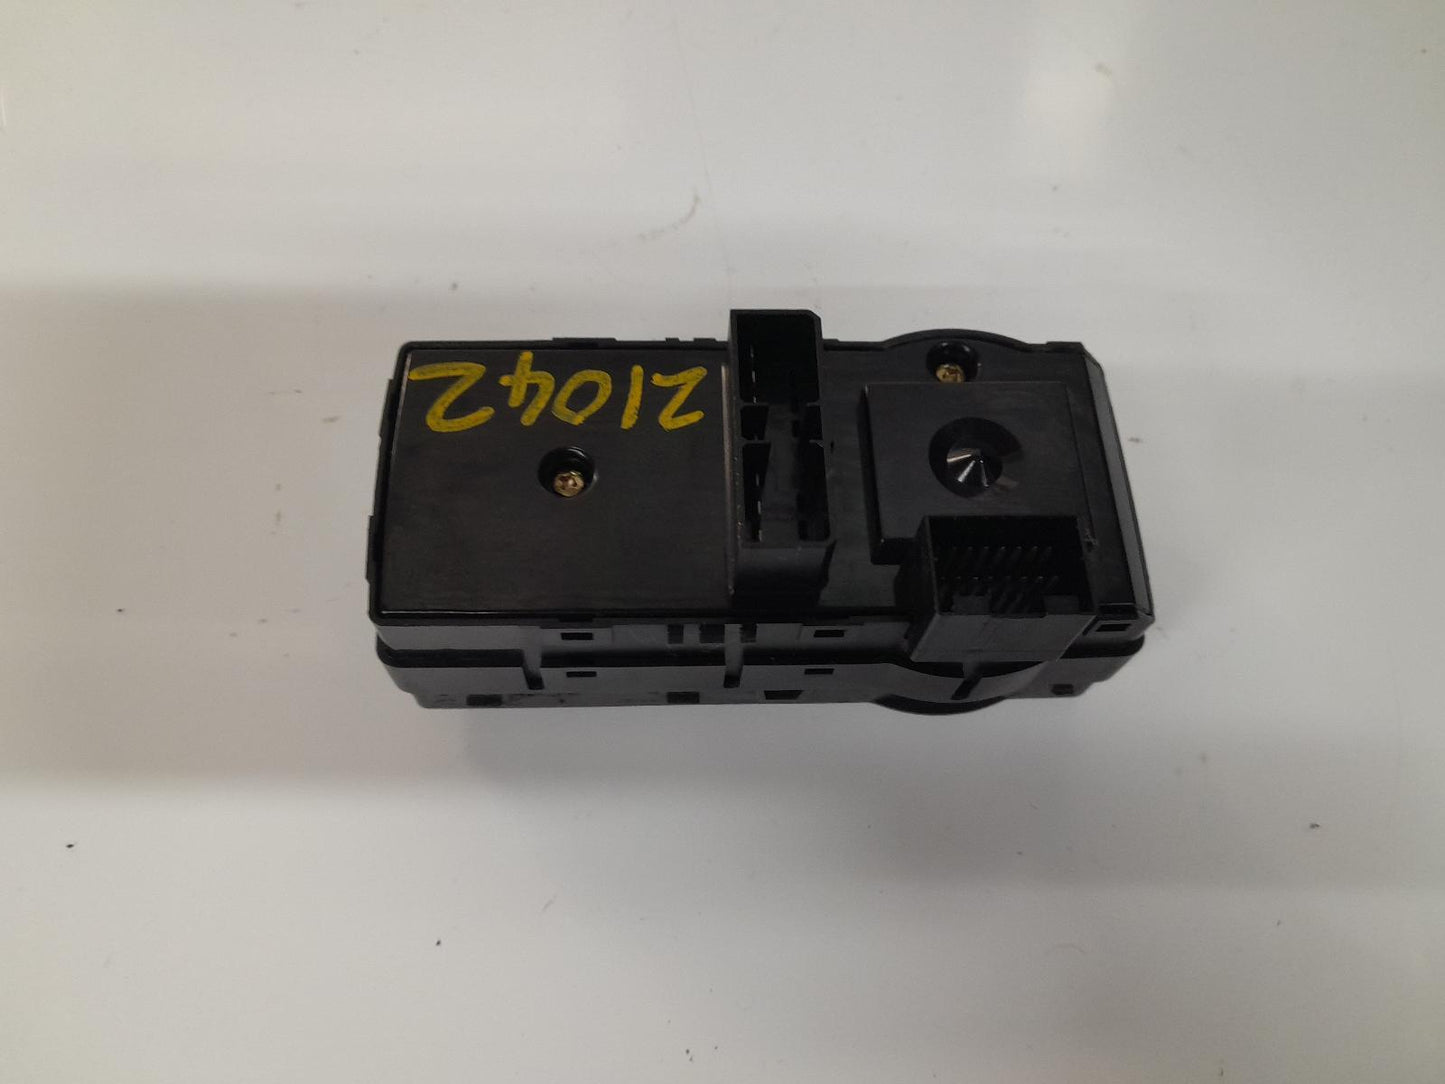 HOLDEN COMMODORE POWER WINDOW SWITCH FRONT CENTRE MASTERSWITCH, 4 DOOR, BLACK, VE, 05/06-04/13